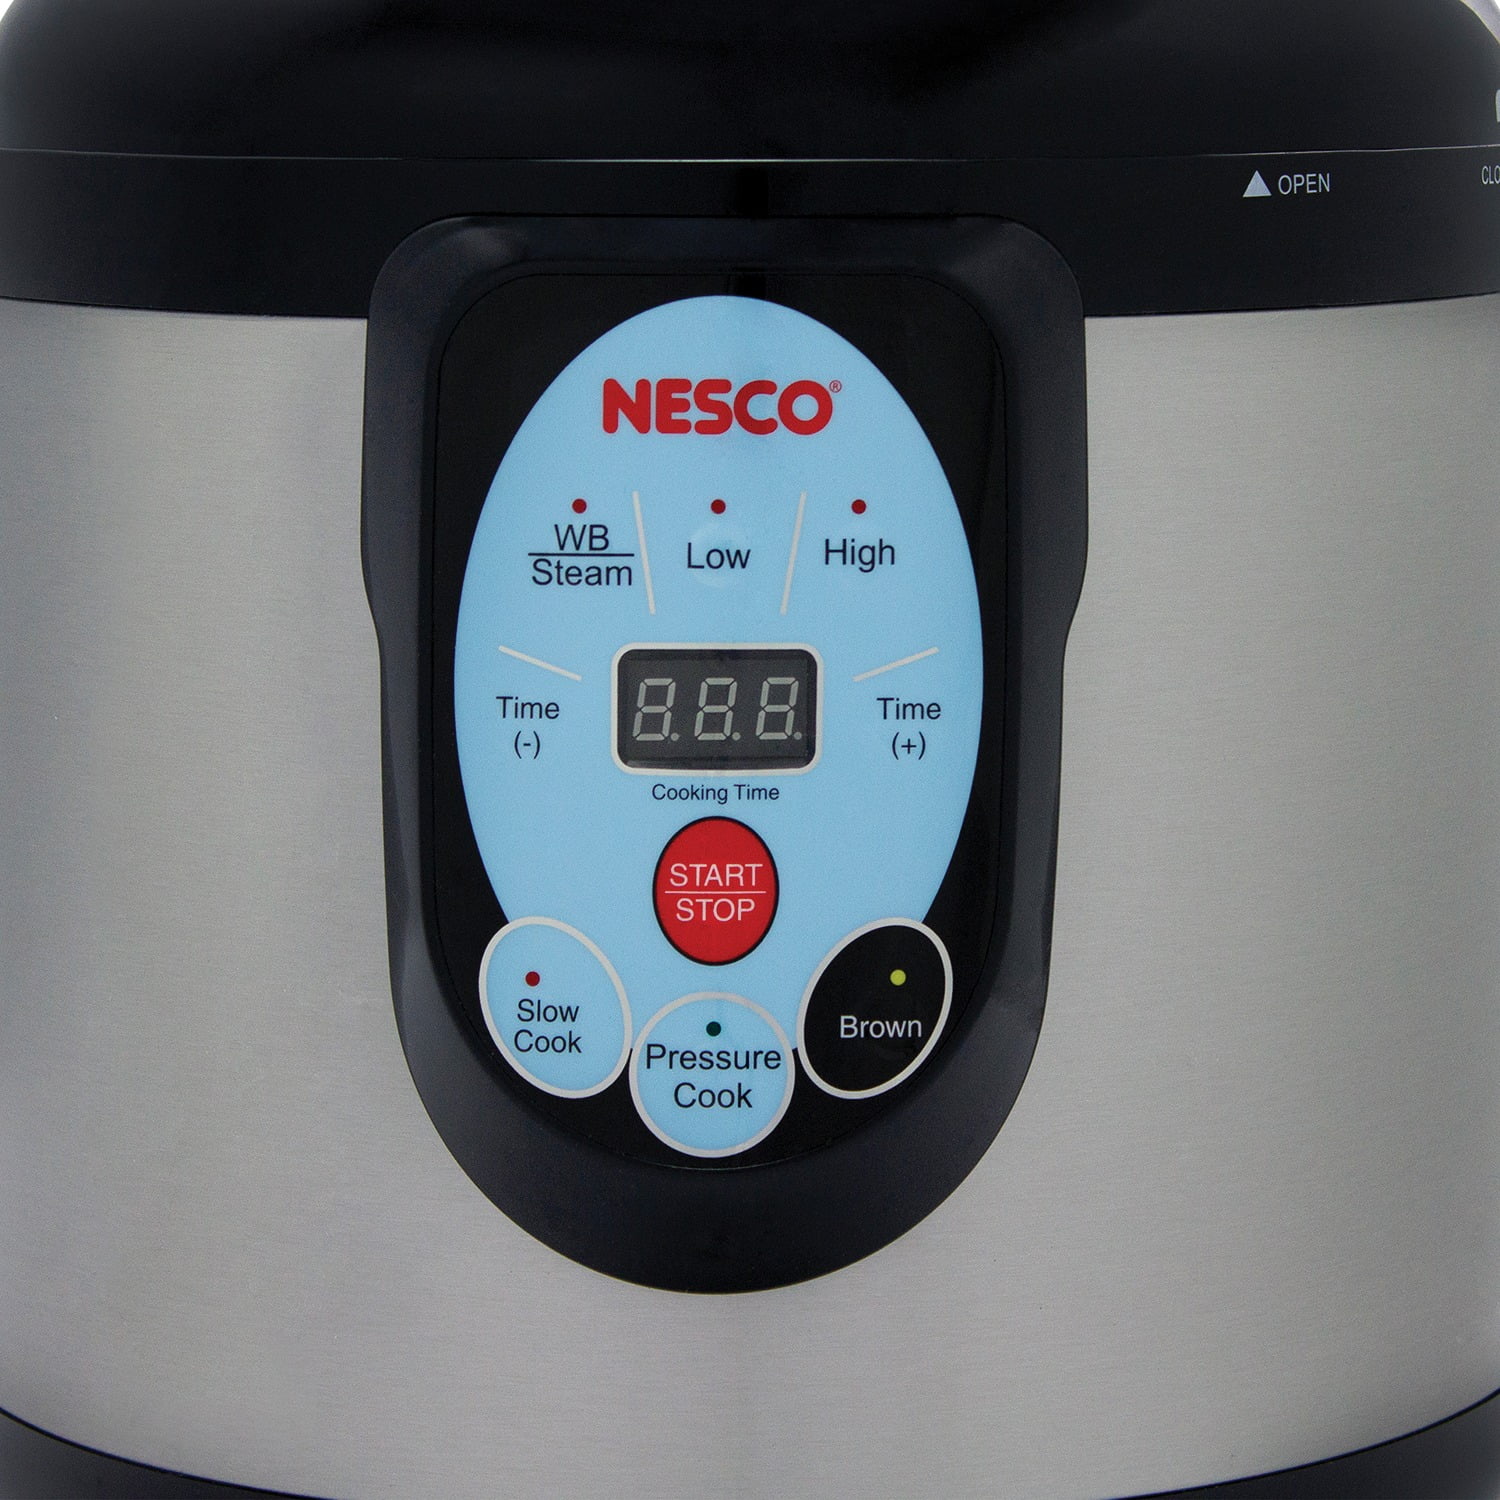 How to get started with your Carey or Nesco electric pressure